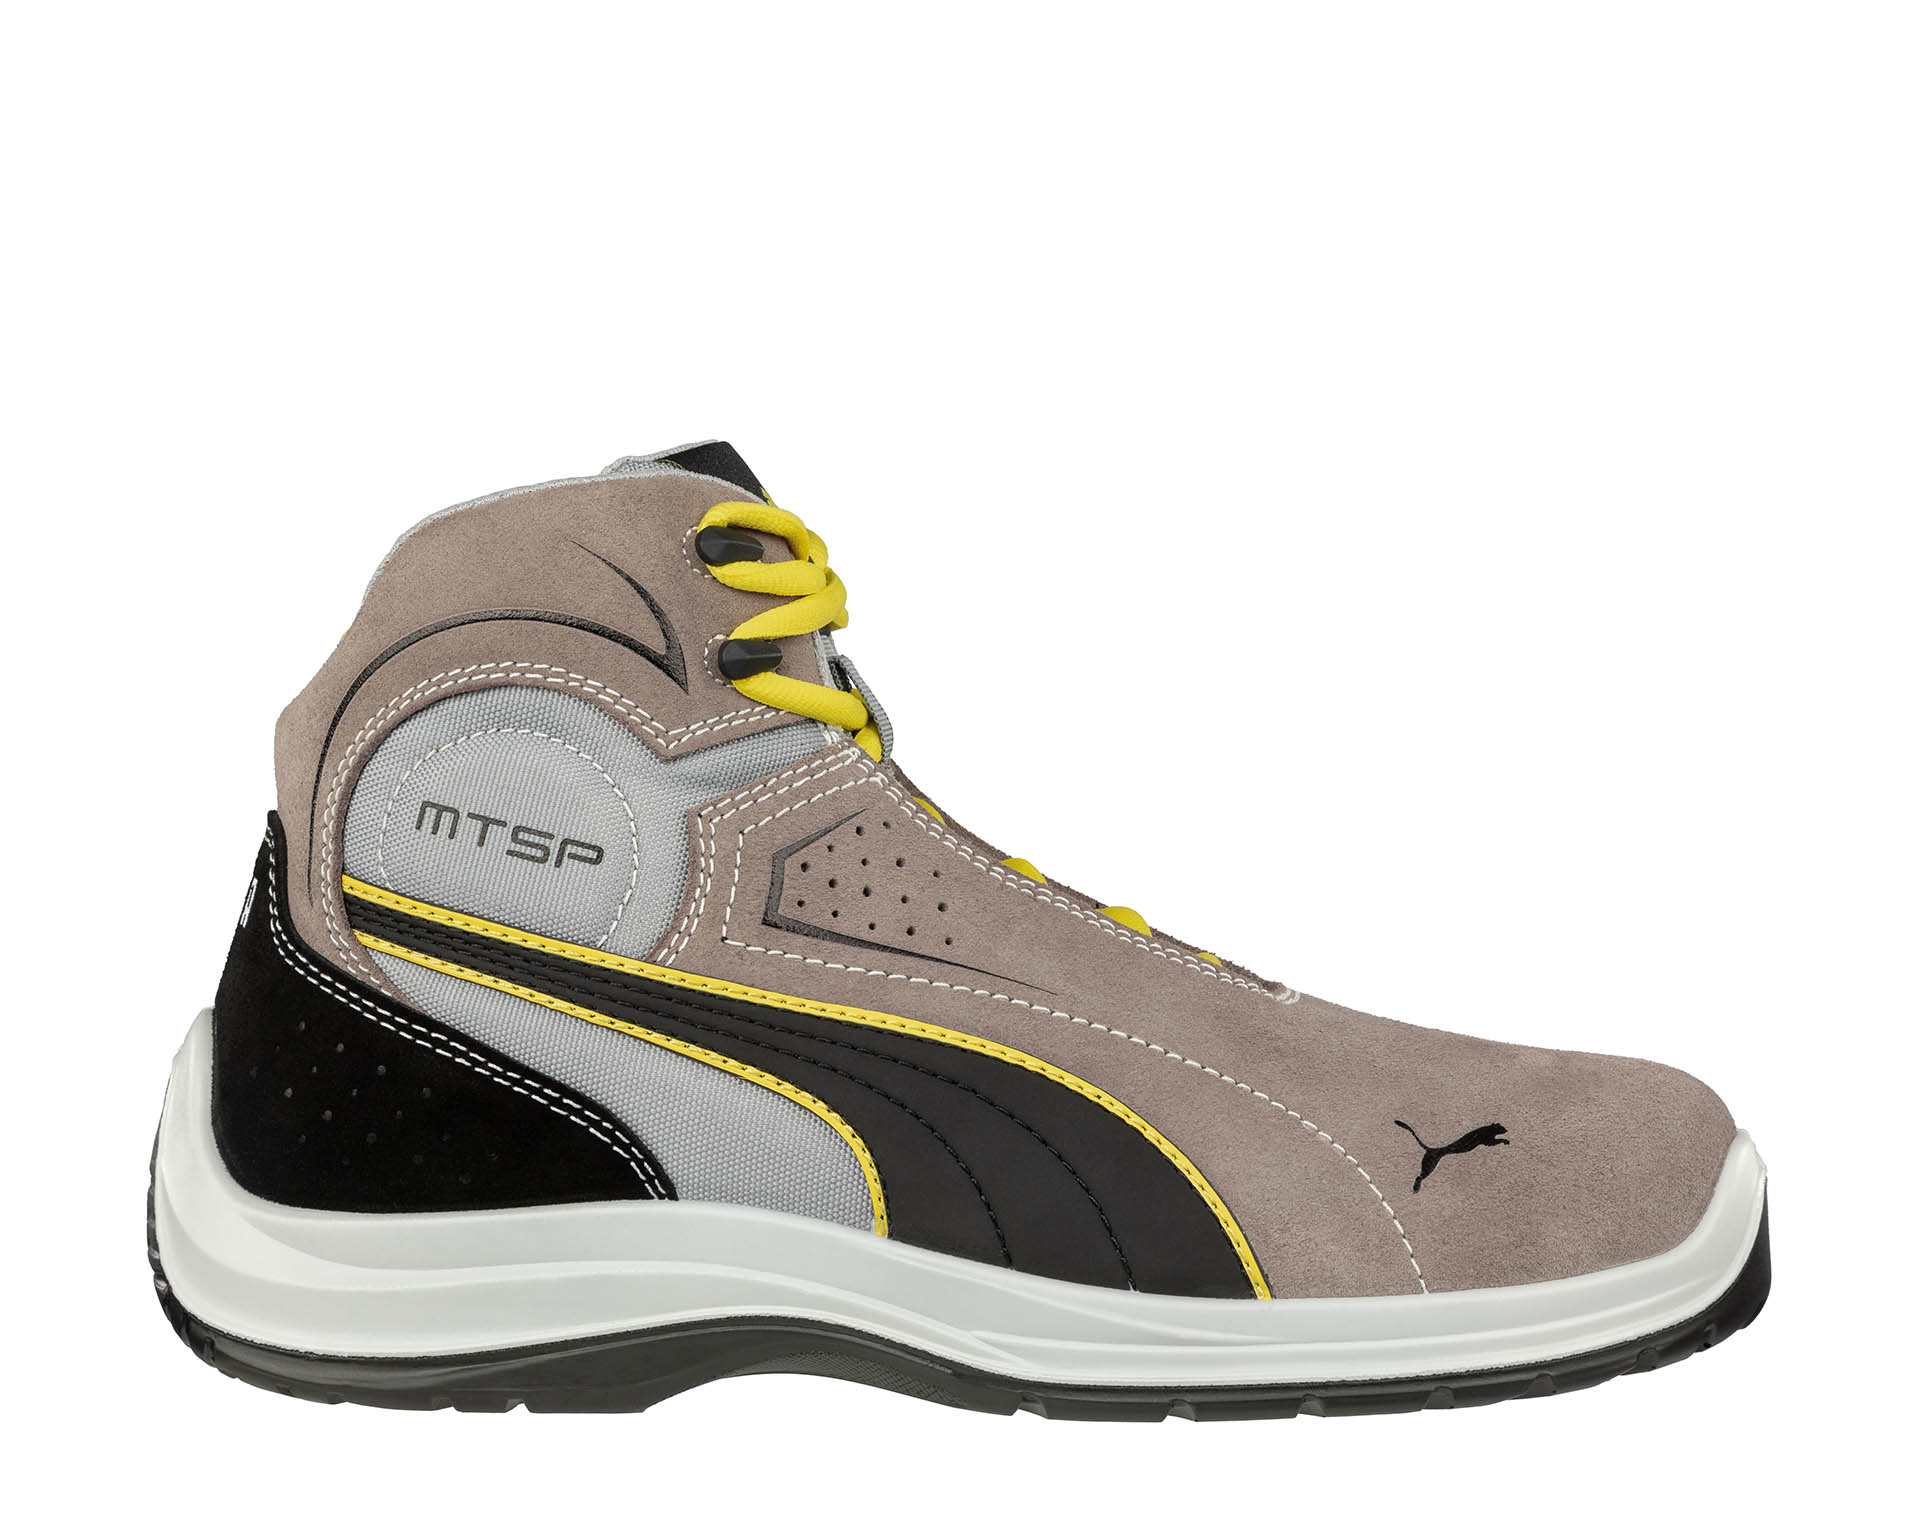 PUMA SAFETY safety shoes S3 SRC TOURING STONE MID | Puma Safety English